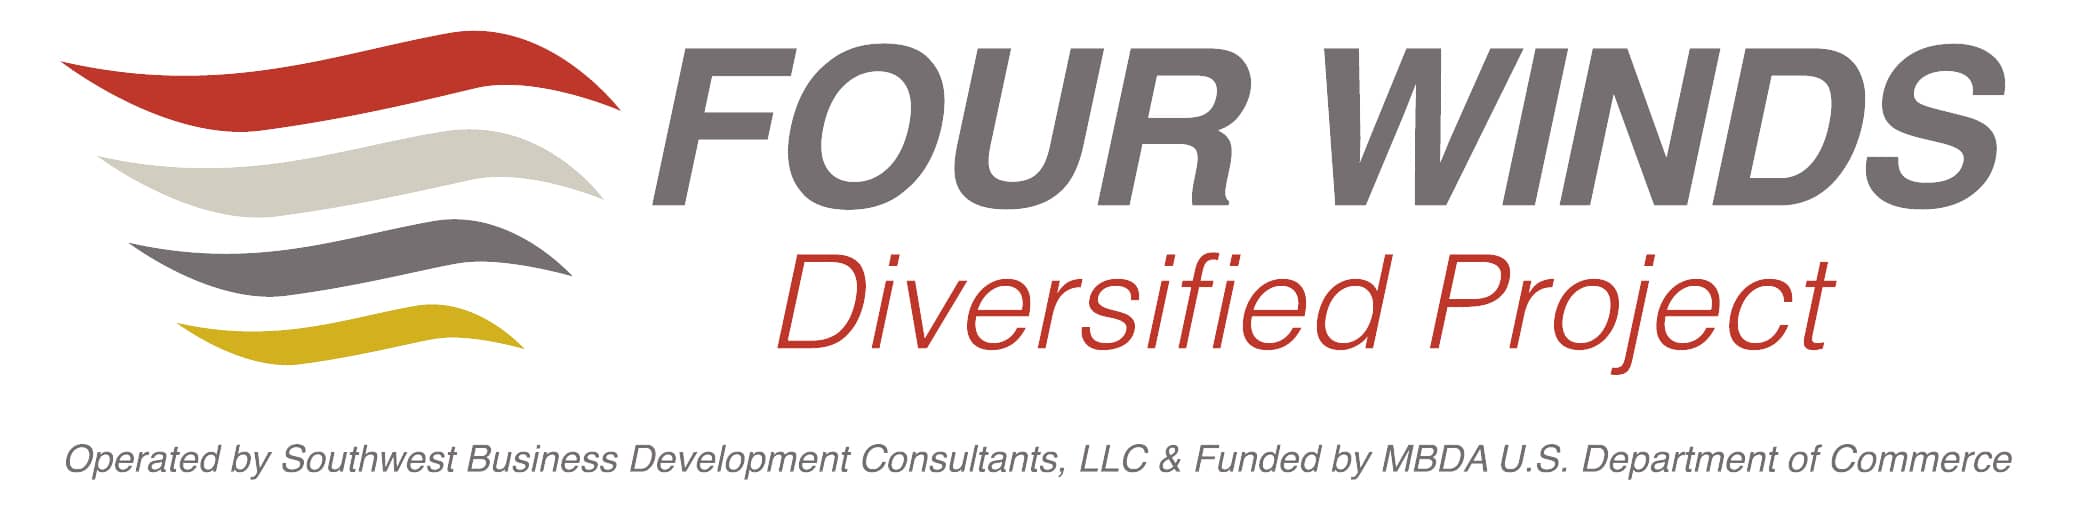 Four Winds Diversified Project